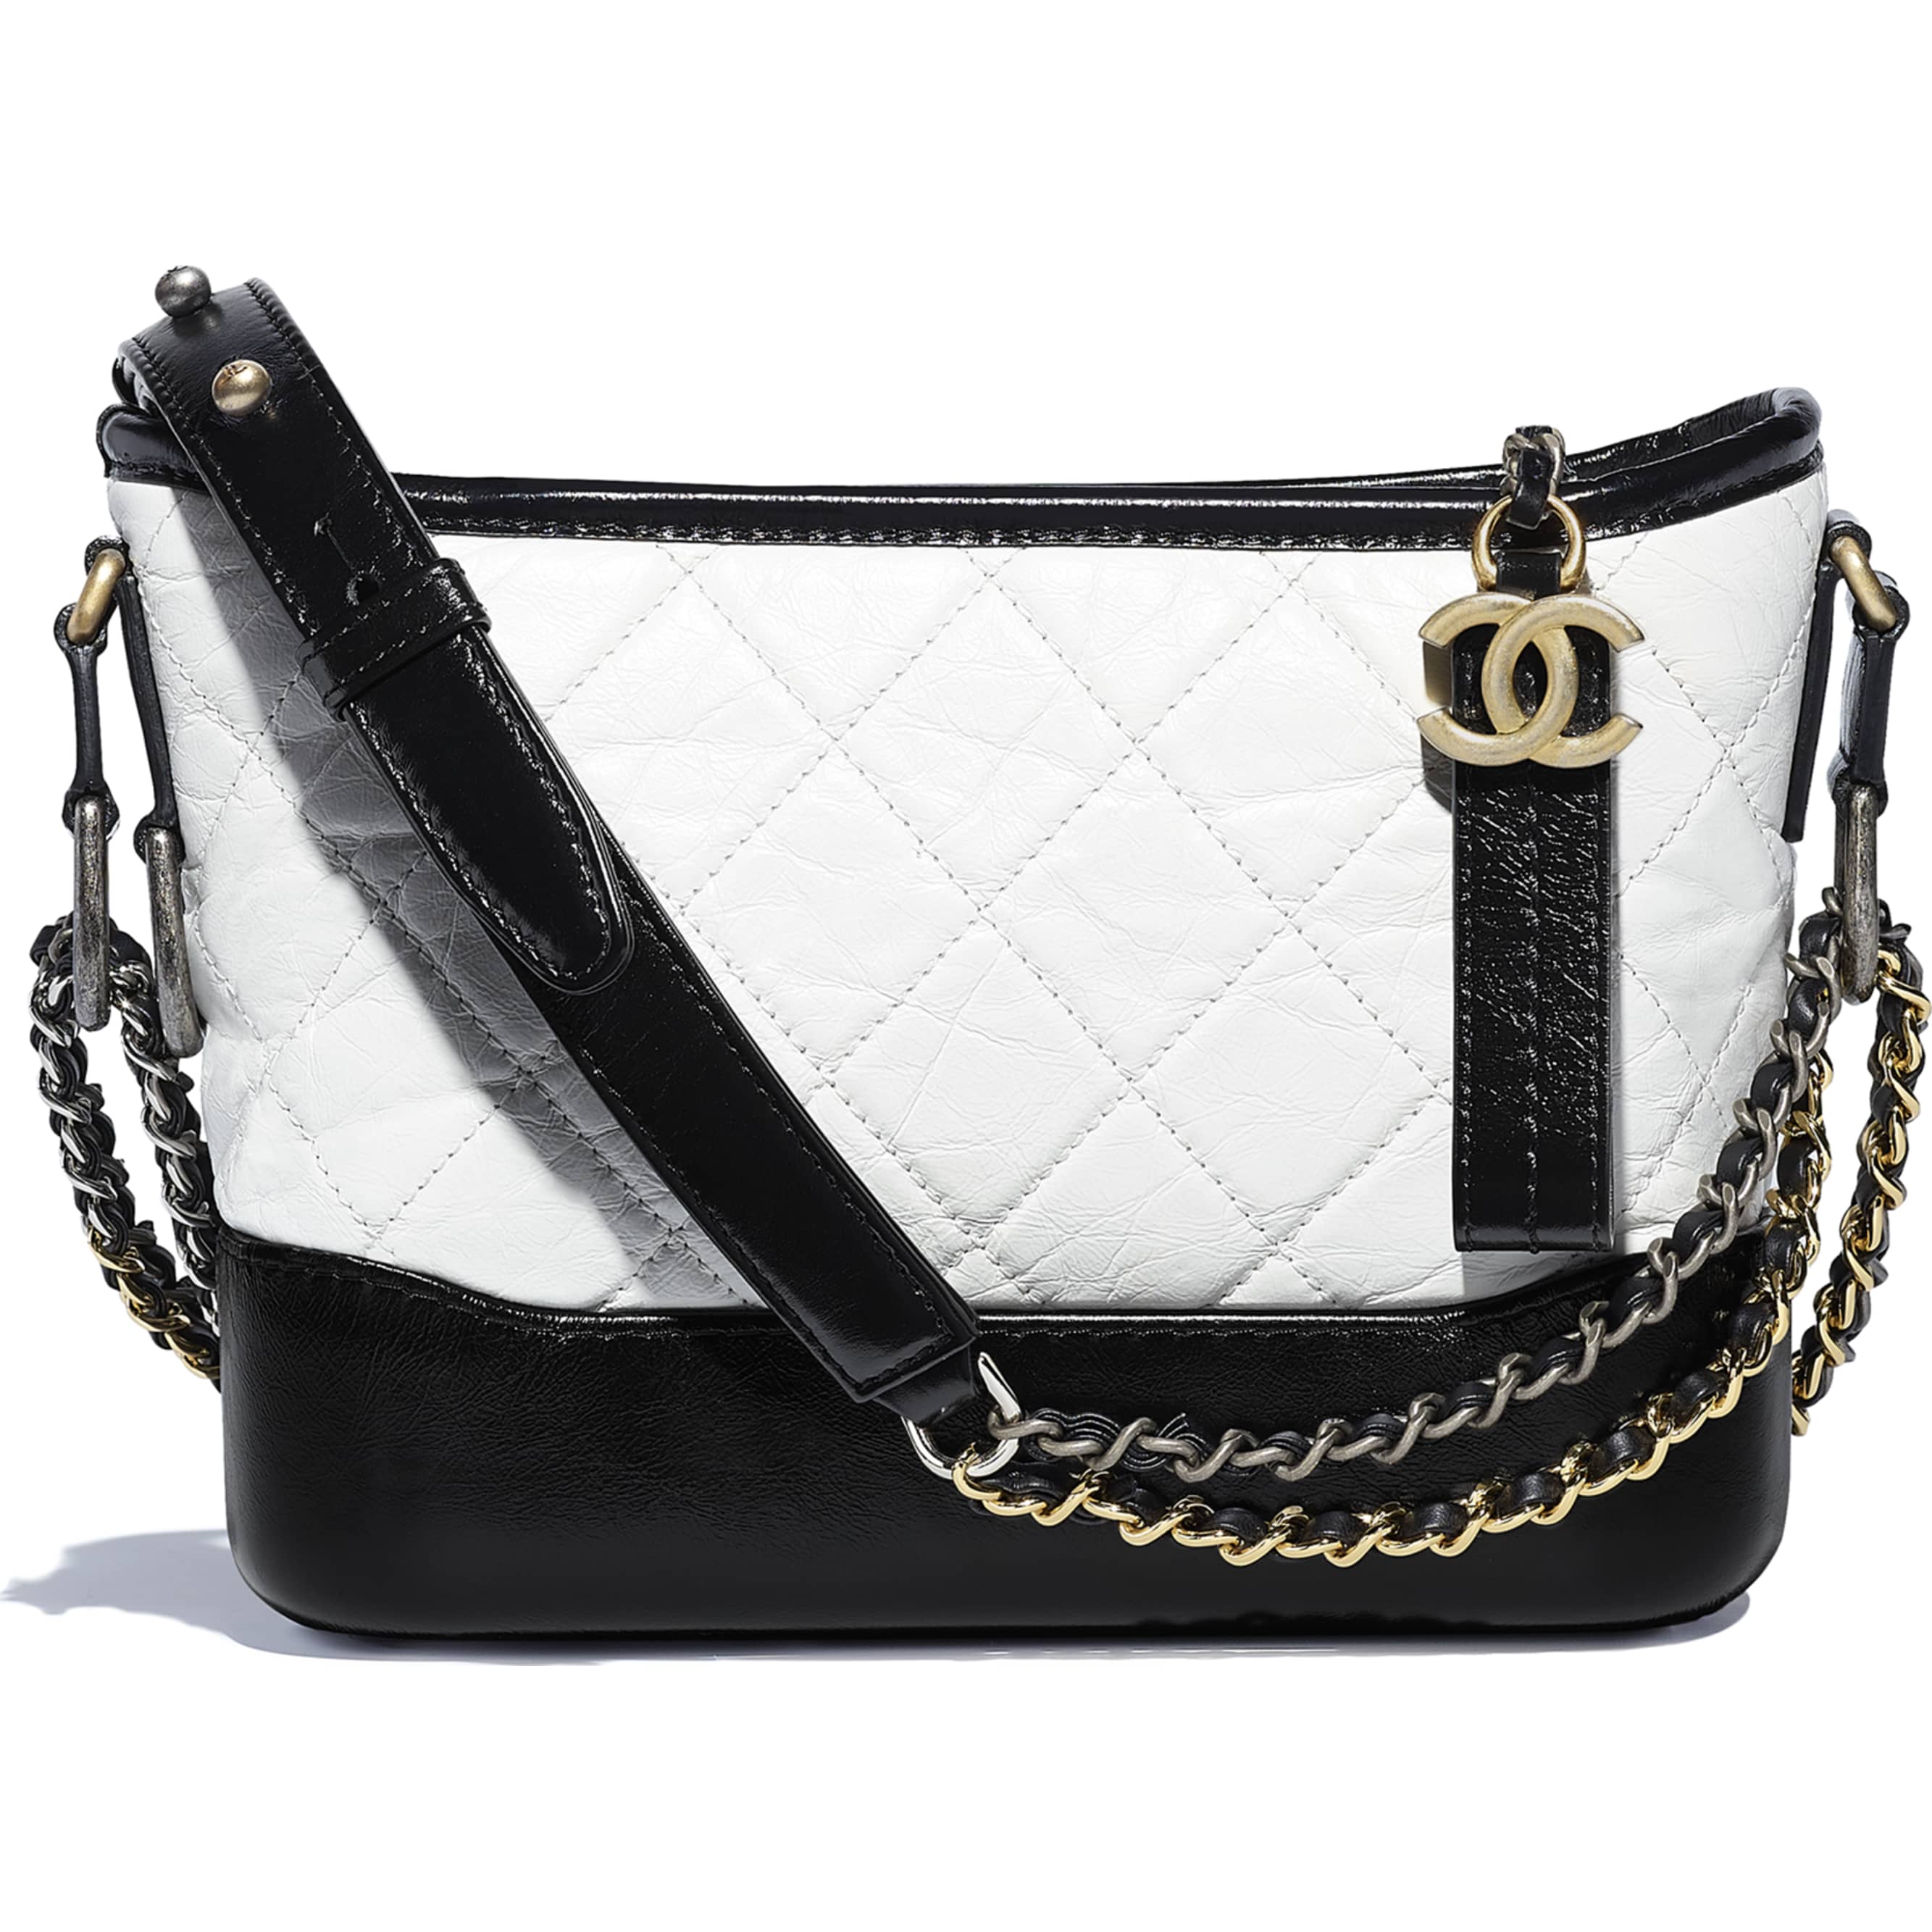 CHANEL CHANEL 19 Medium Flap Bag in 20S Black And White Ribbon Houndstooth  Tweed  Dearluxe